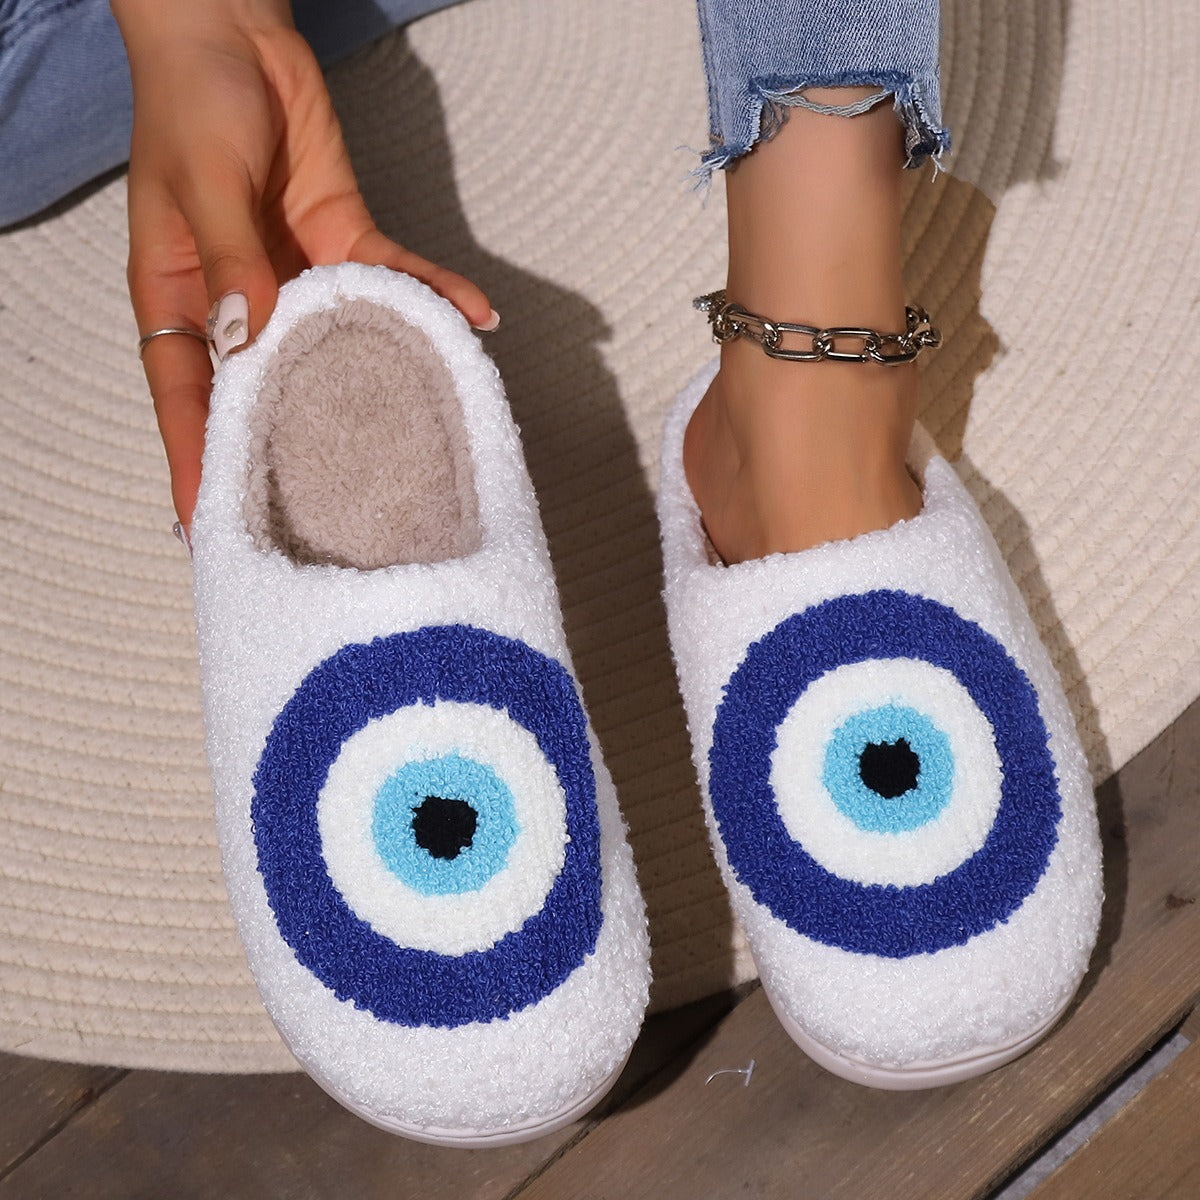 Warm and comfortable winter cotton slippers